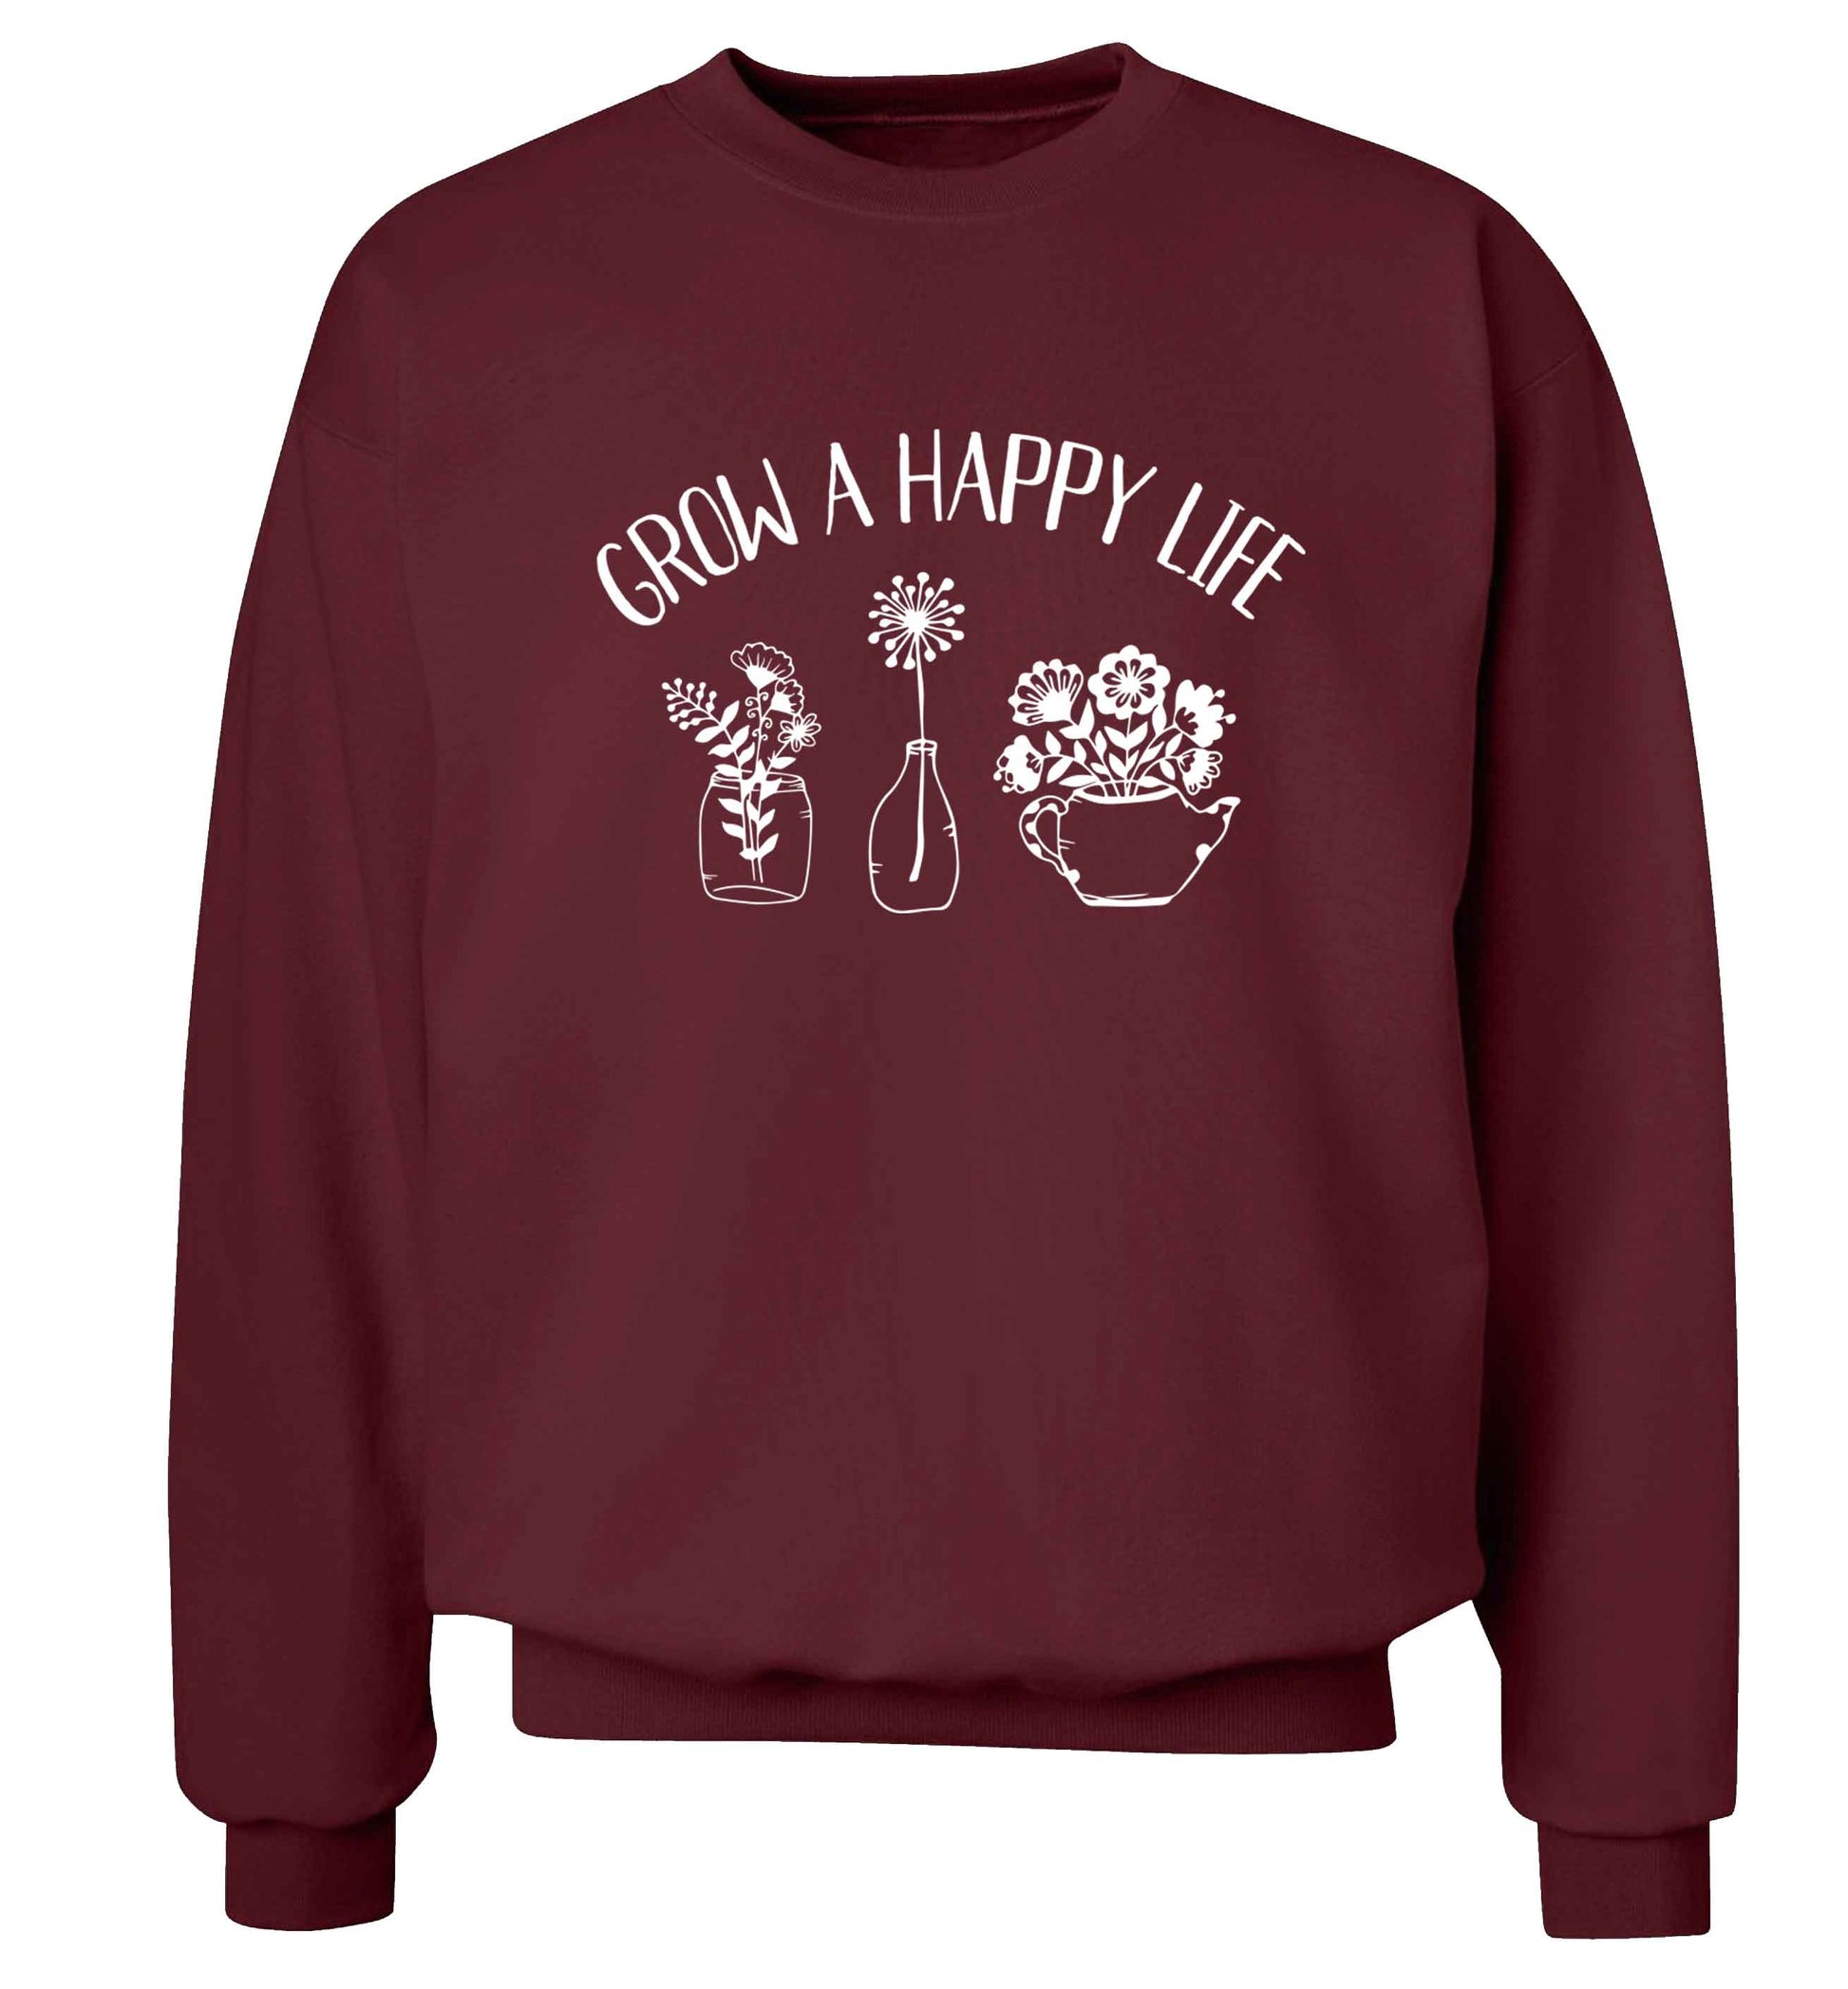 Grow a happy life Adult's unisex maroon Sweater 2XL